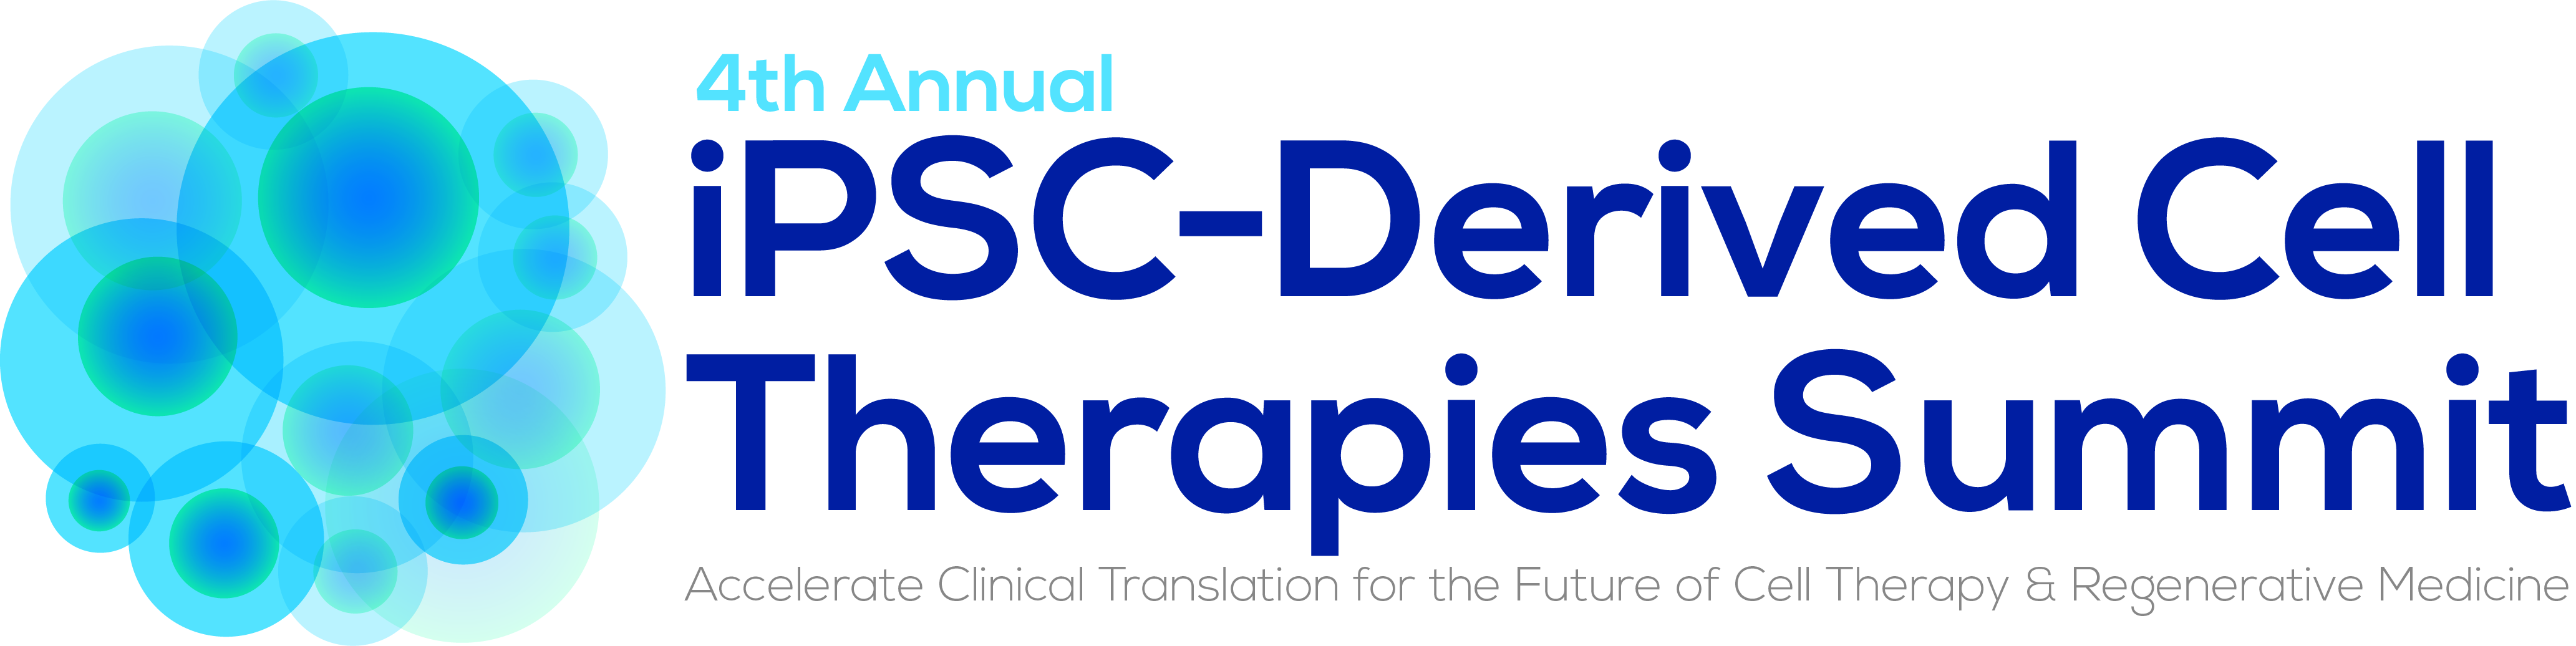 4th iPSC-Derived Cell Therapies Summit